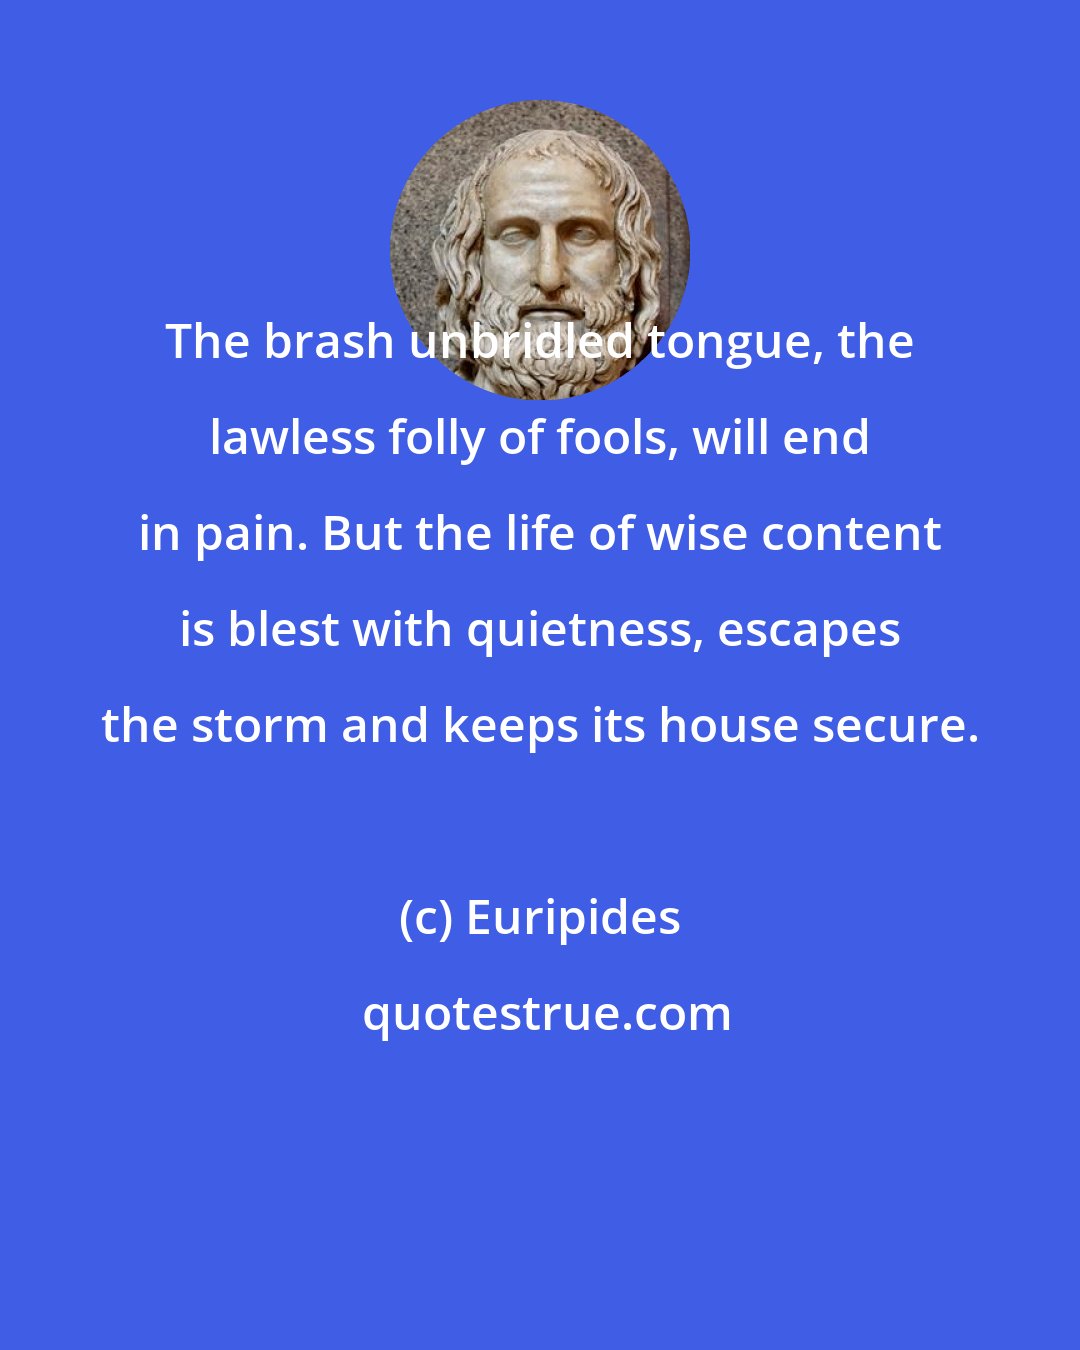 Euripides: The brash unbridled tongue, the lawless folly of fools, will end in pain. But the life of wise content is blest with quietness, escapes the storm and keeps its house secure.